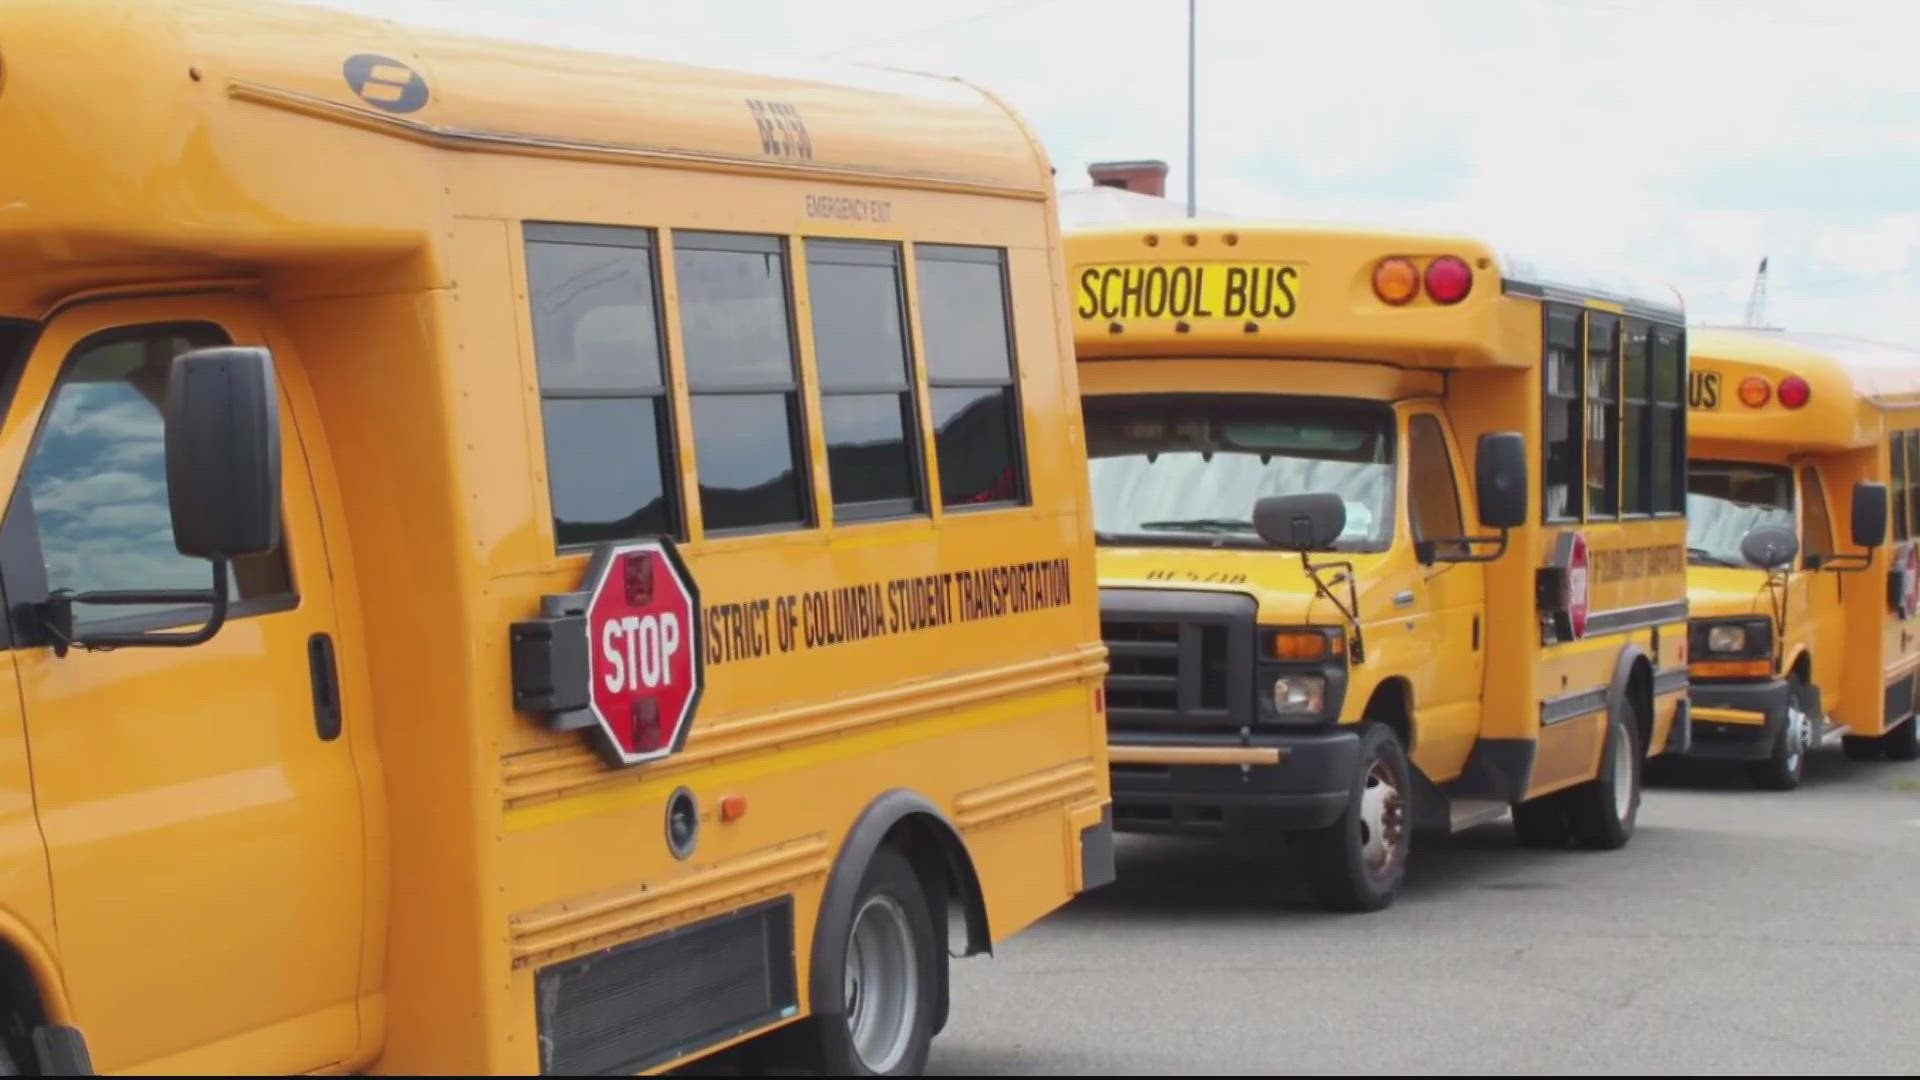 School buses that are hours late or complete no shows - - without notice or explanations. That's what dozens of frustrated parents told DC leaders today.